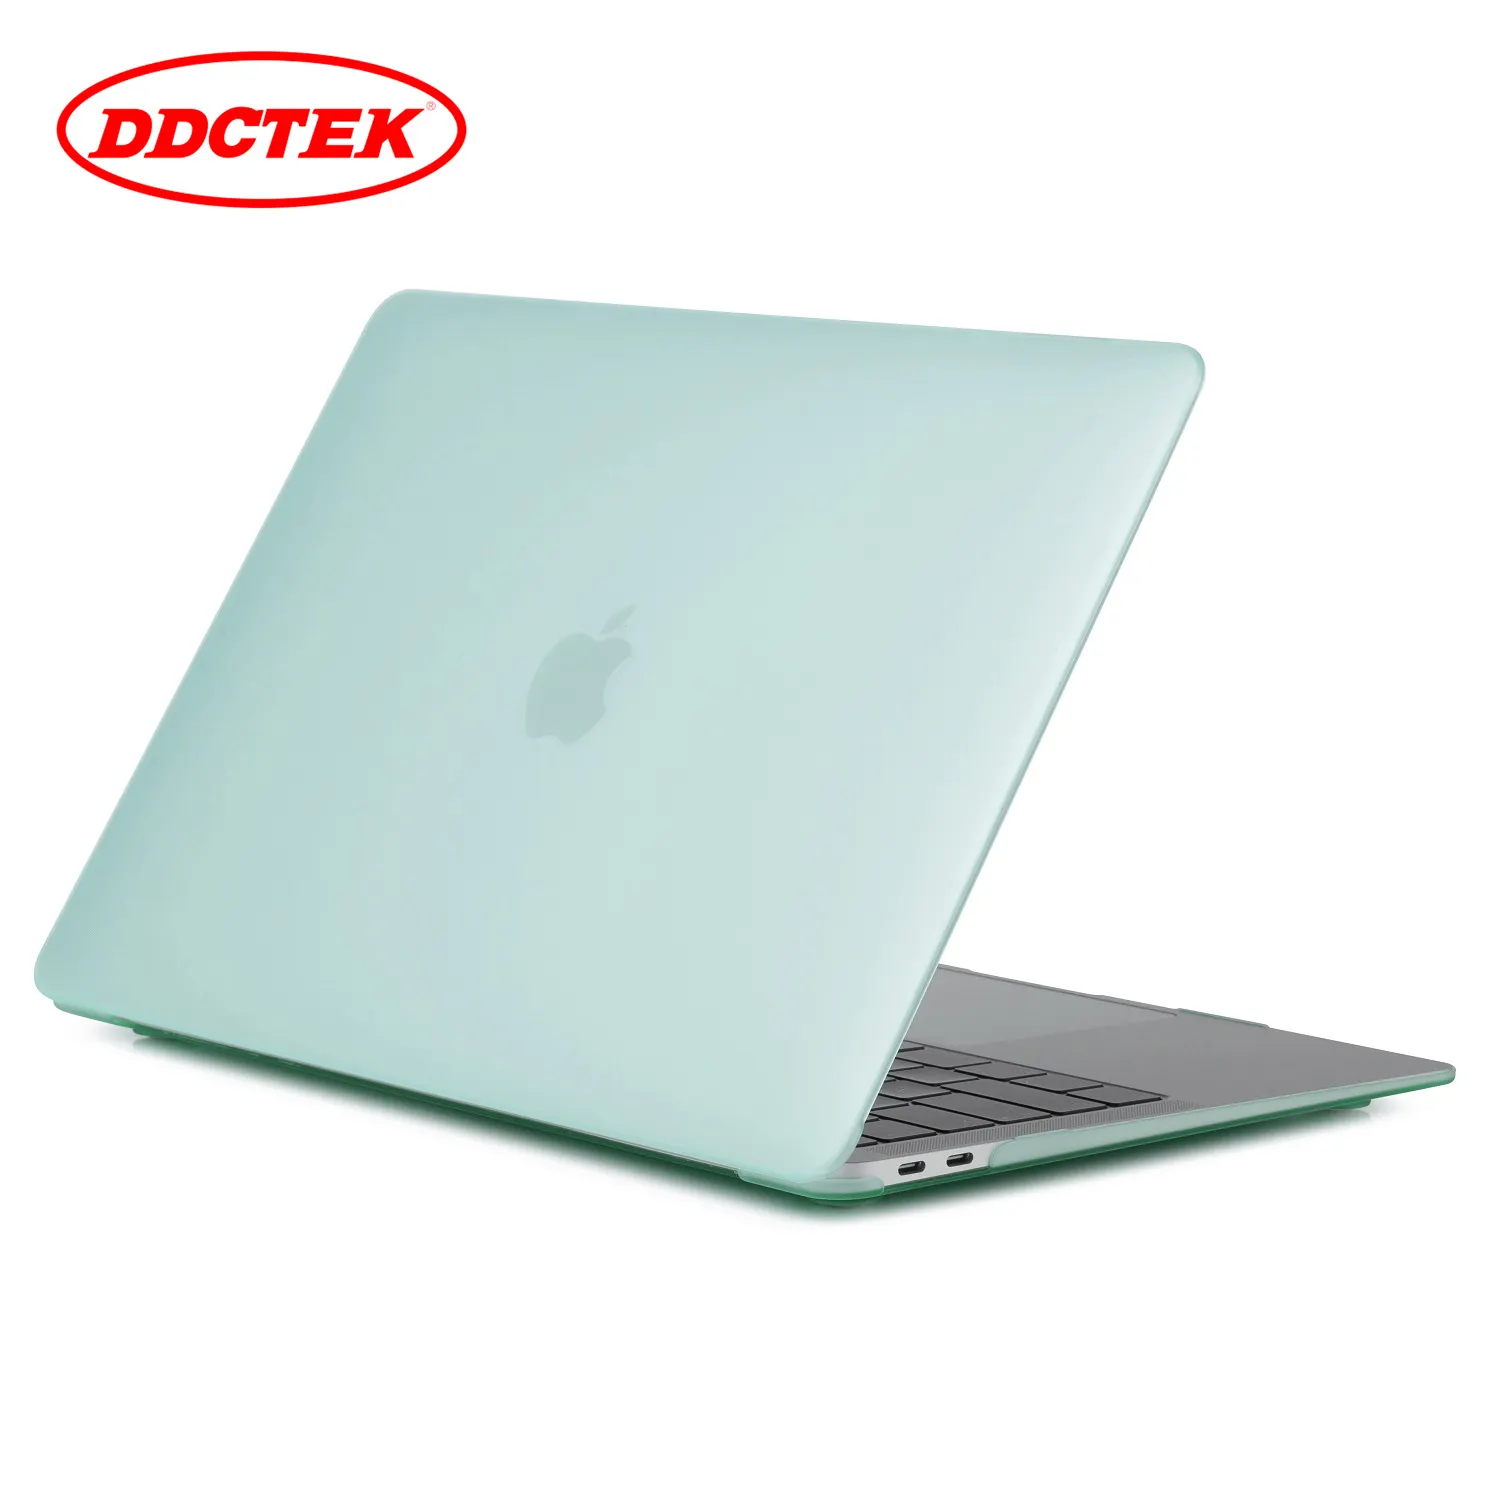 Custom waterproof crystal laptop protective shell, laptop protector for mac book air 13 inch case